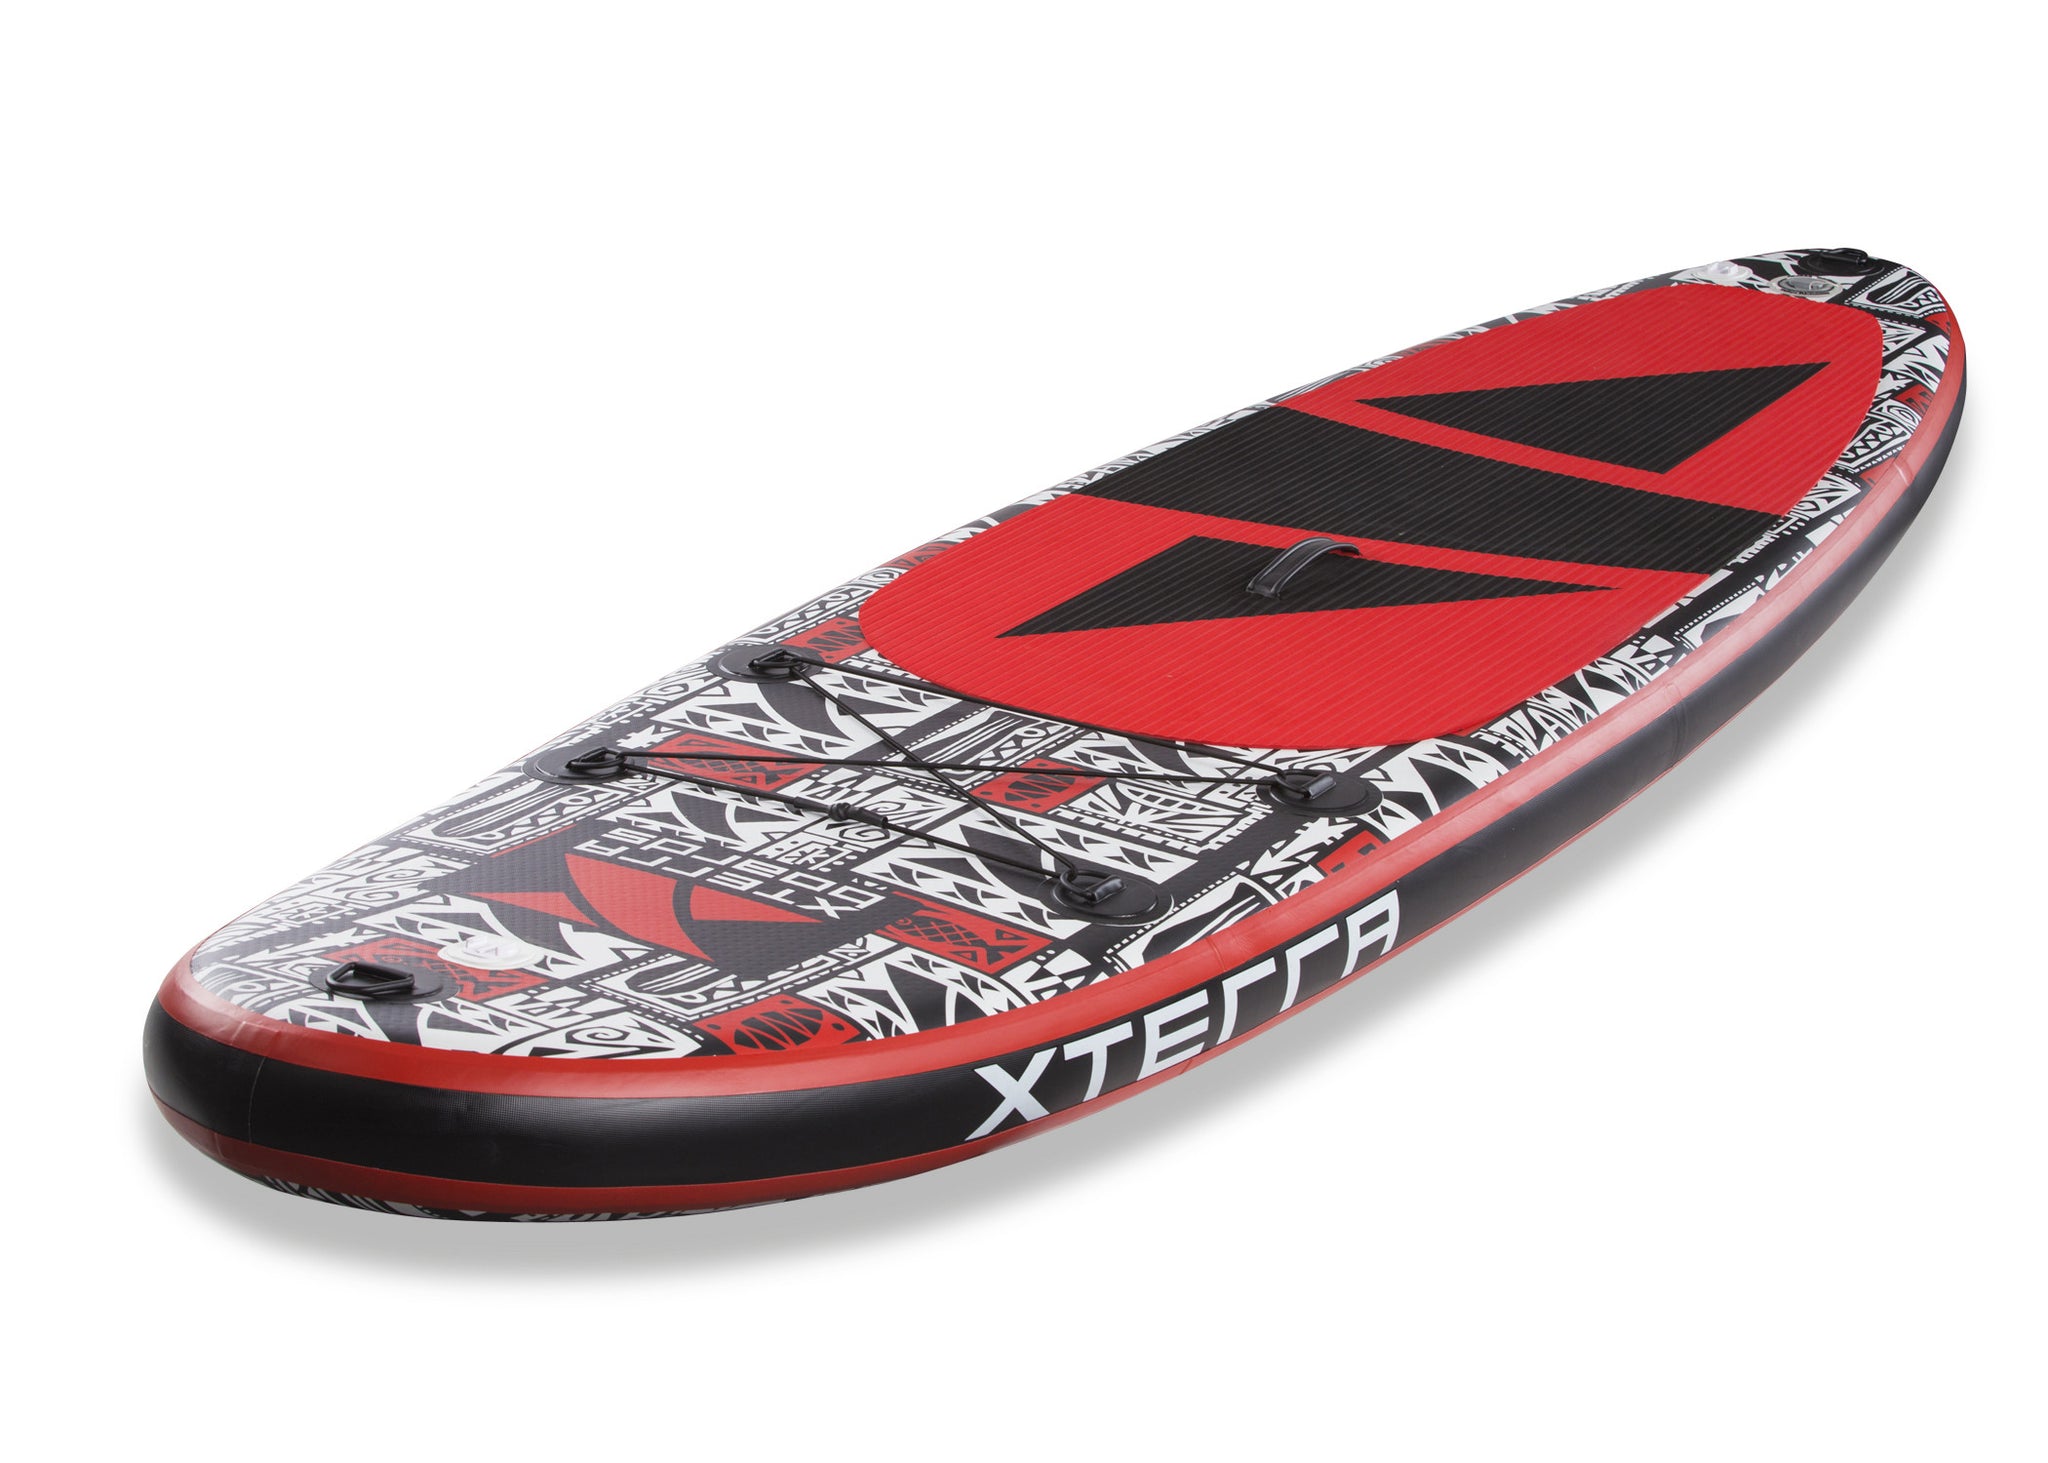 11' Cloud Red Inflatable SUP Package